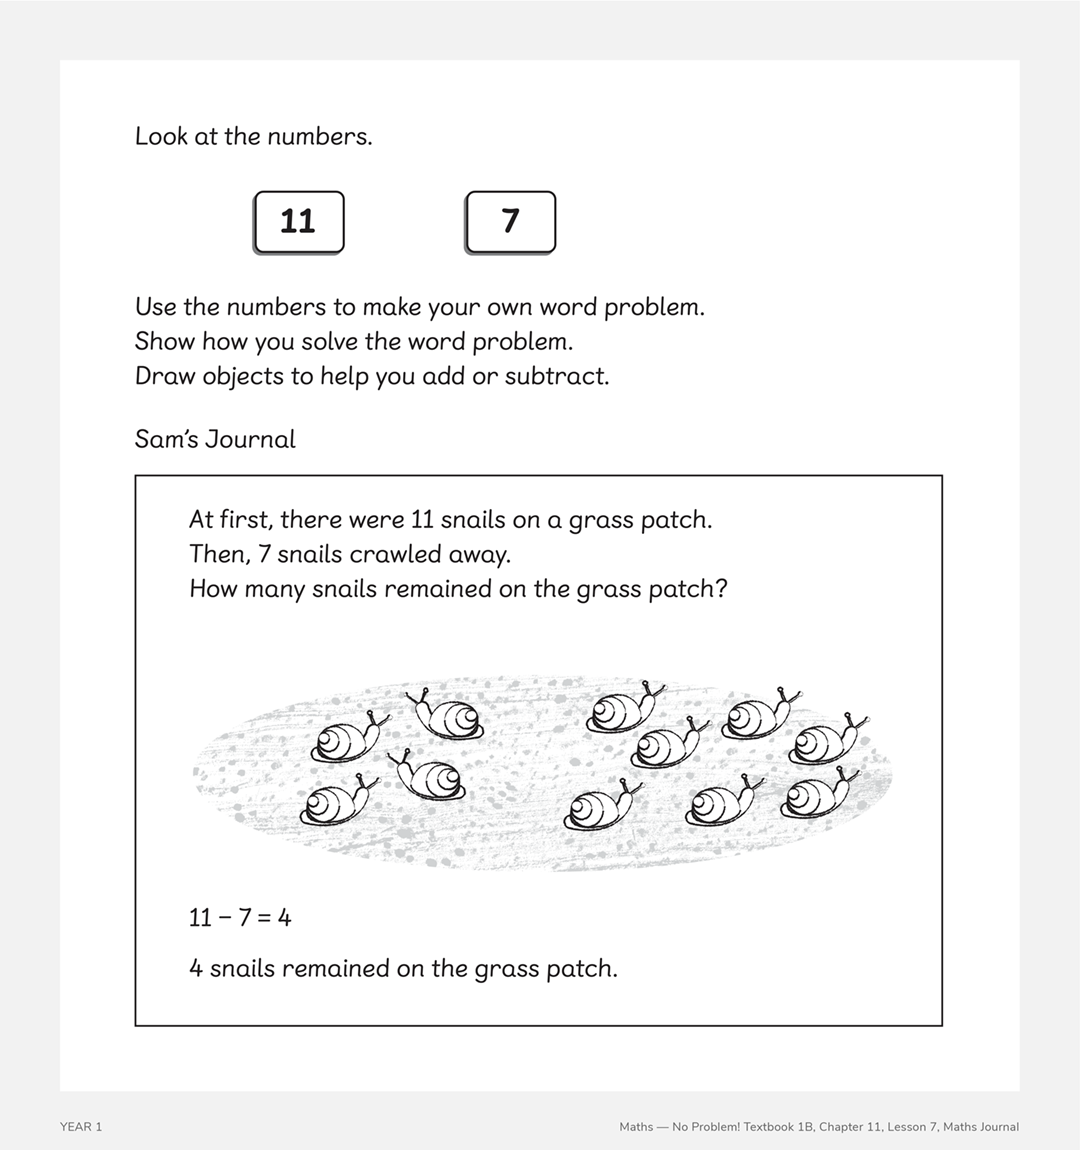 year 1 textbook 1b chapter 11 lesson 7 maths journal activity